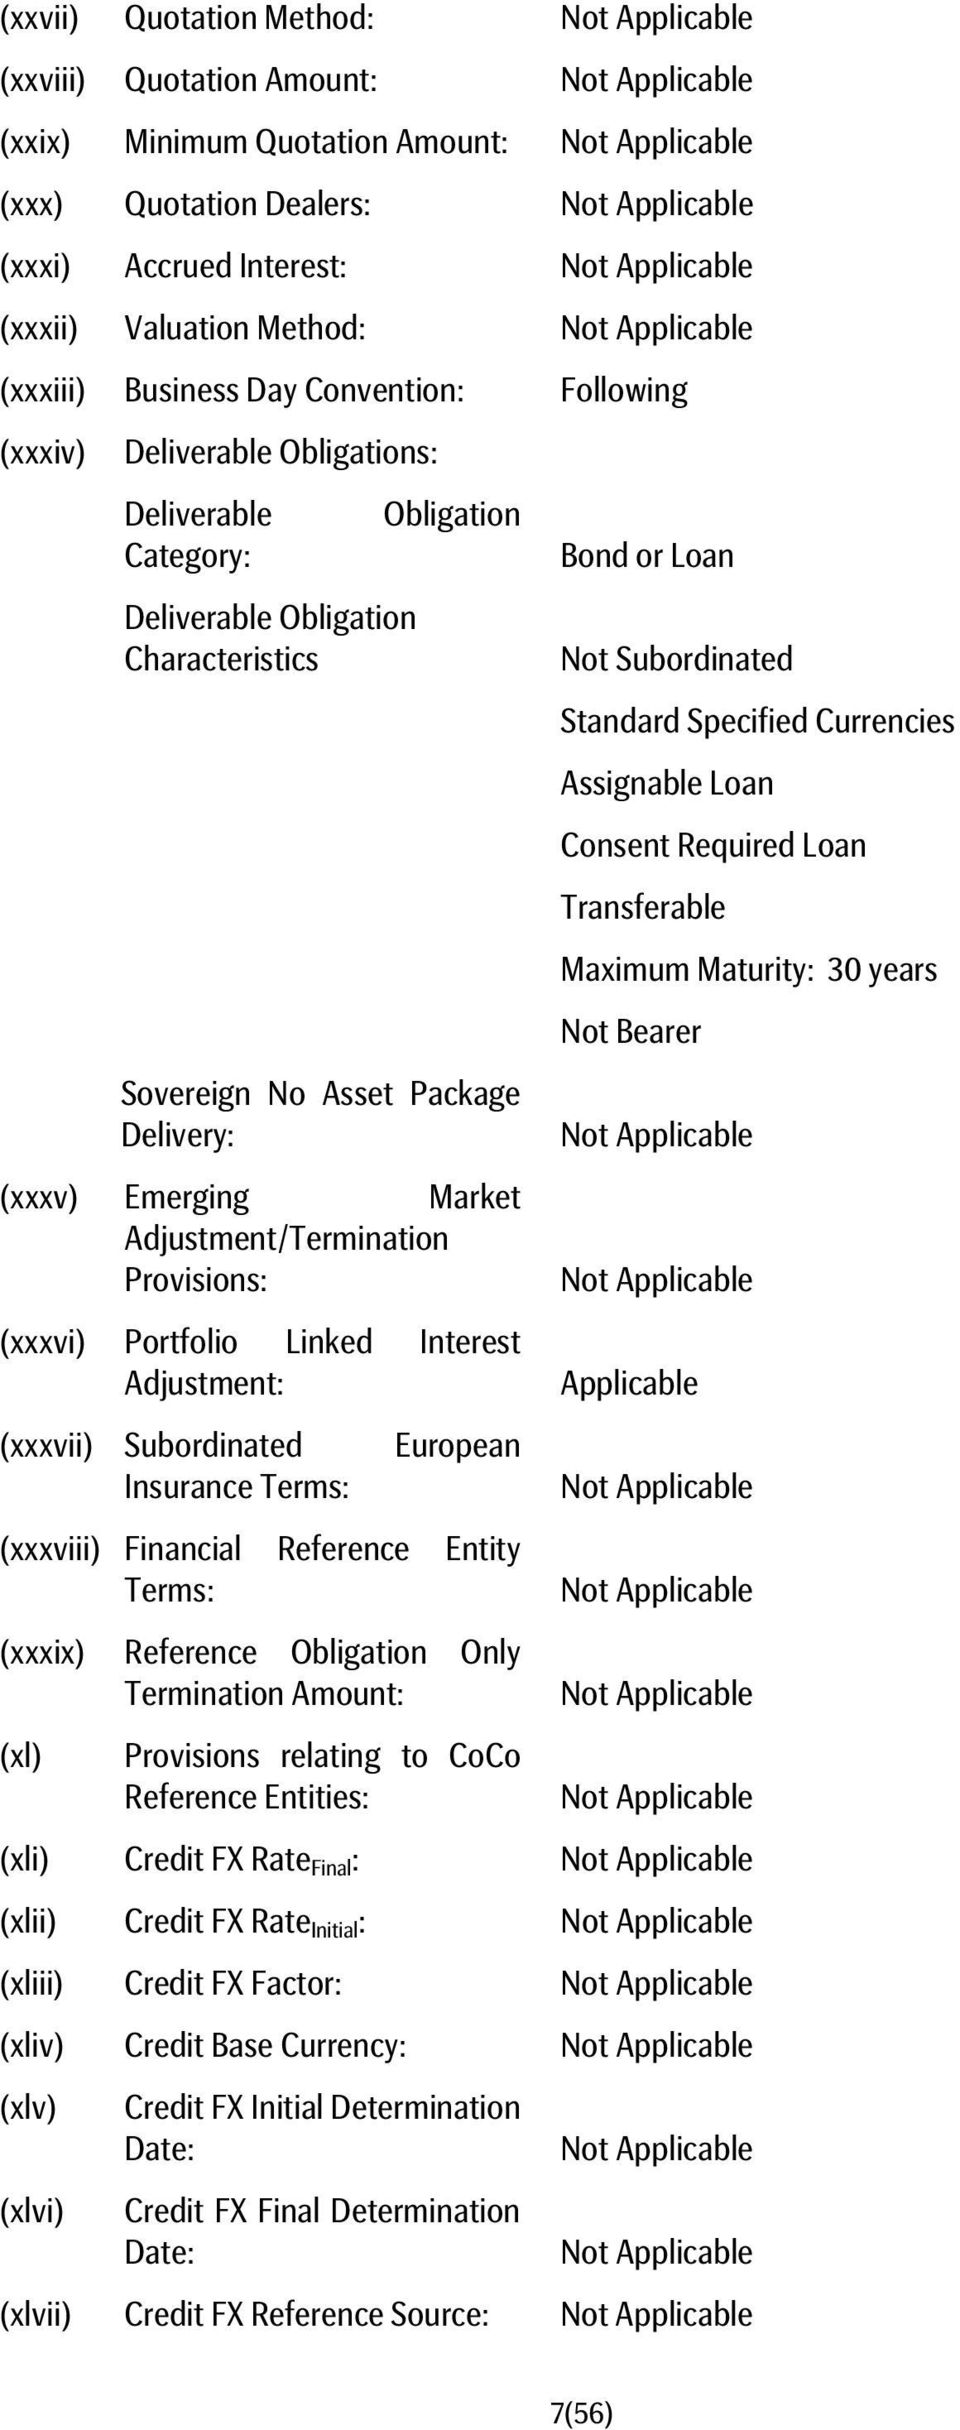 Required Loan Transferable Maximum Maturity: 30 years Not Bearer Sovereign No Asset Package Delivery: (xxxv) Emerging Market Adjustment/Termination Provisions: (xxxvi) Portfolio Linked Interest